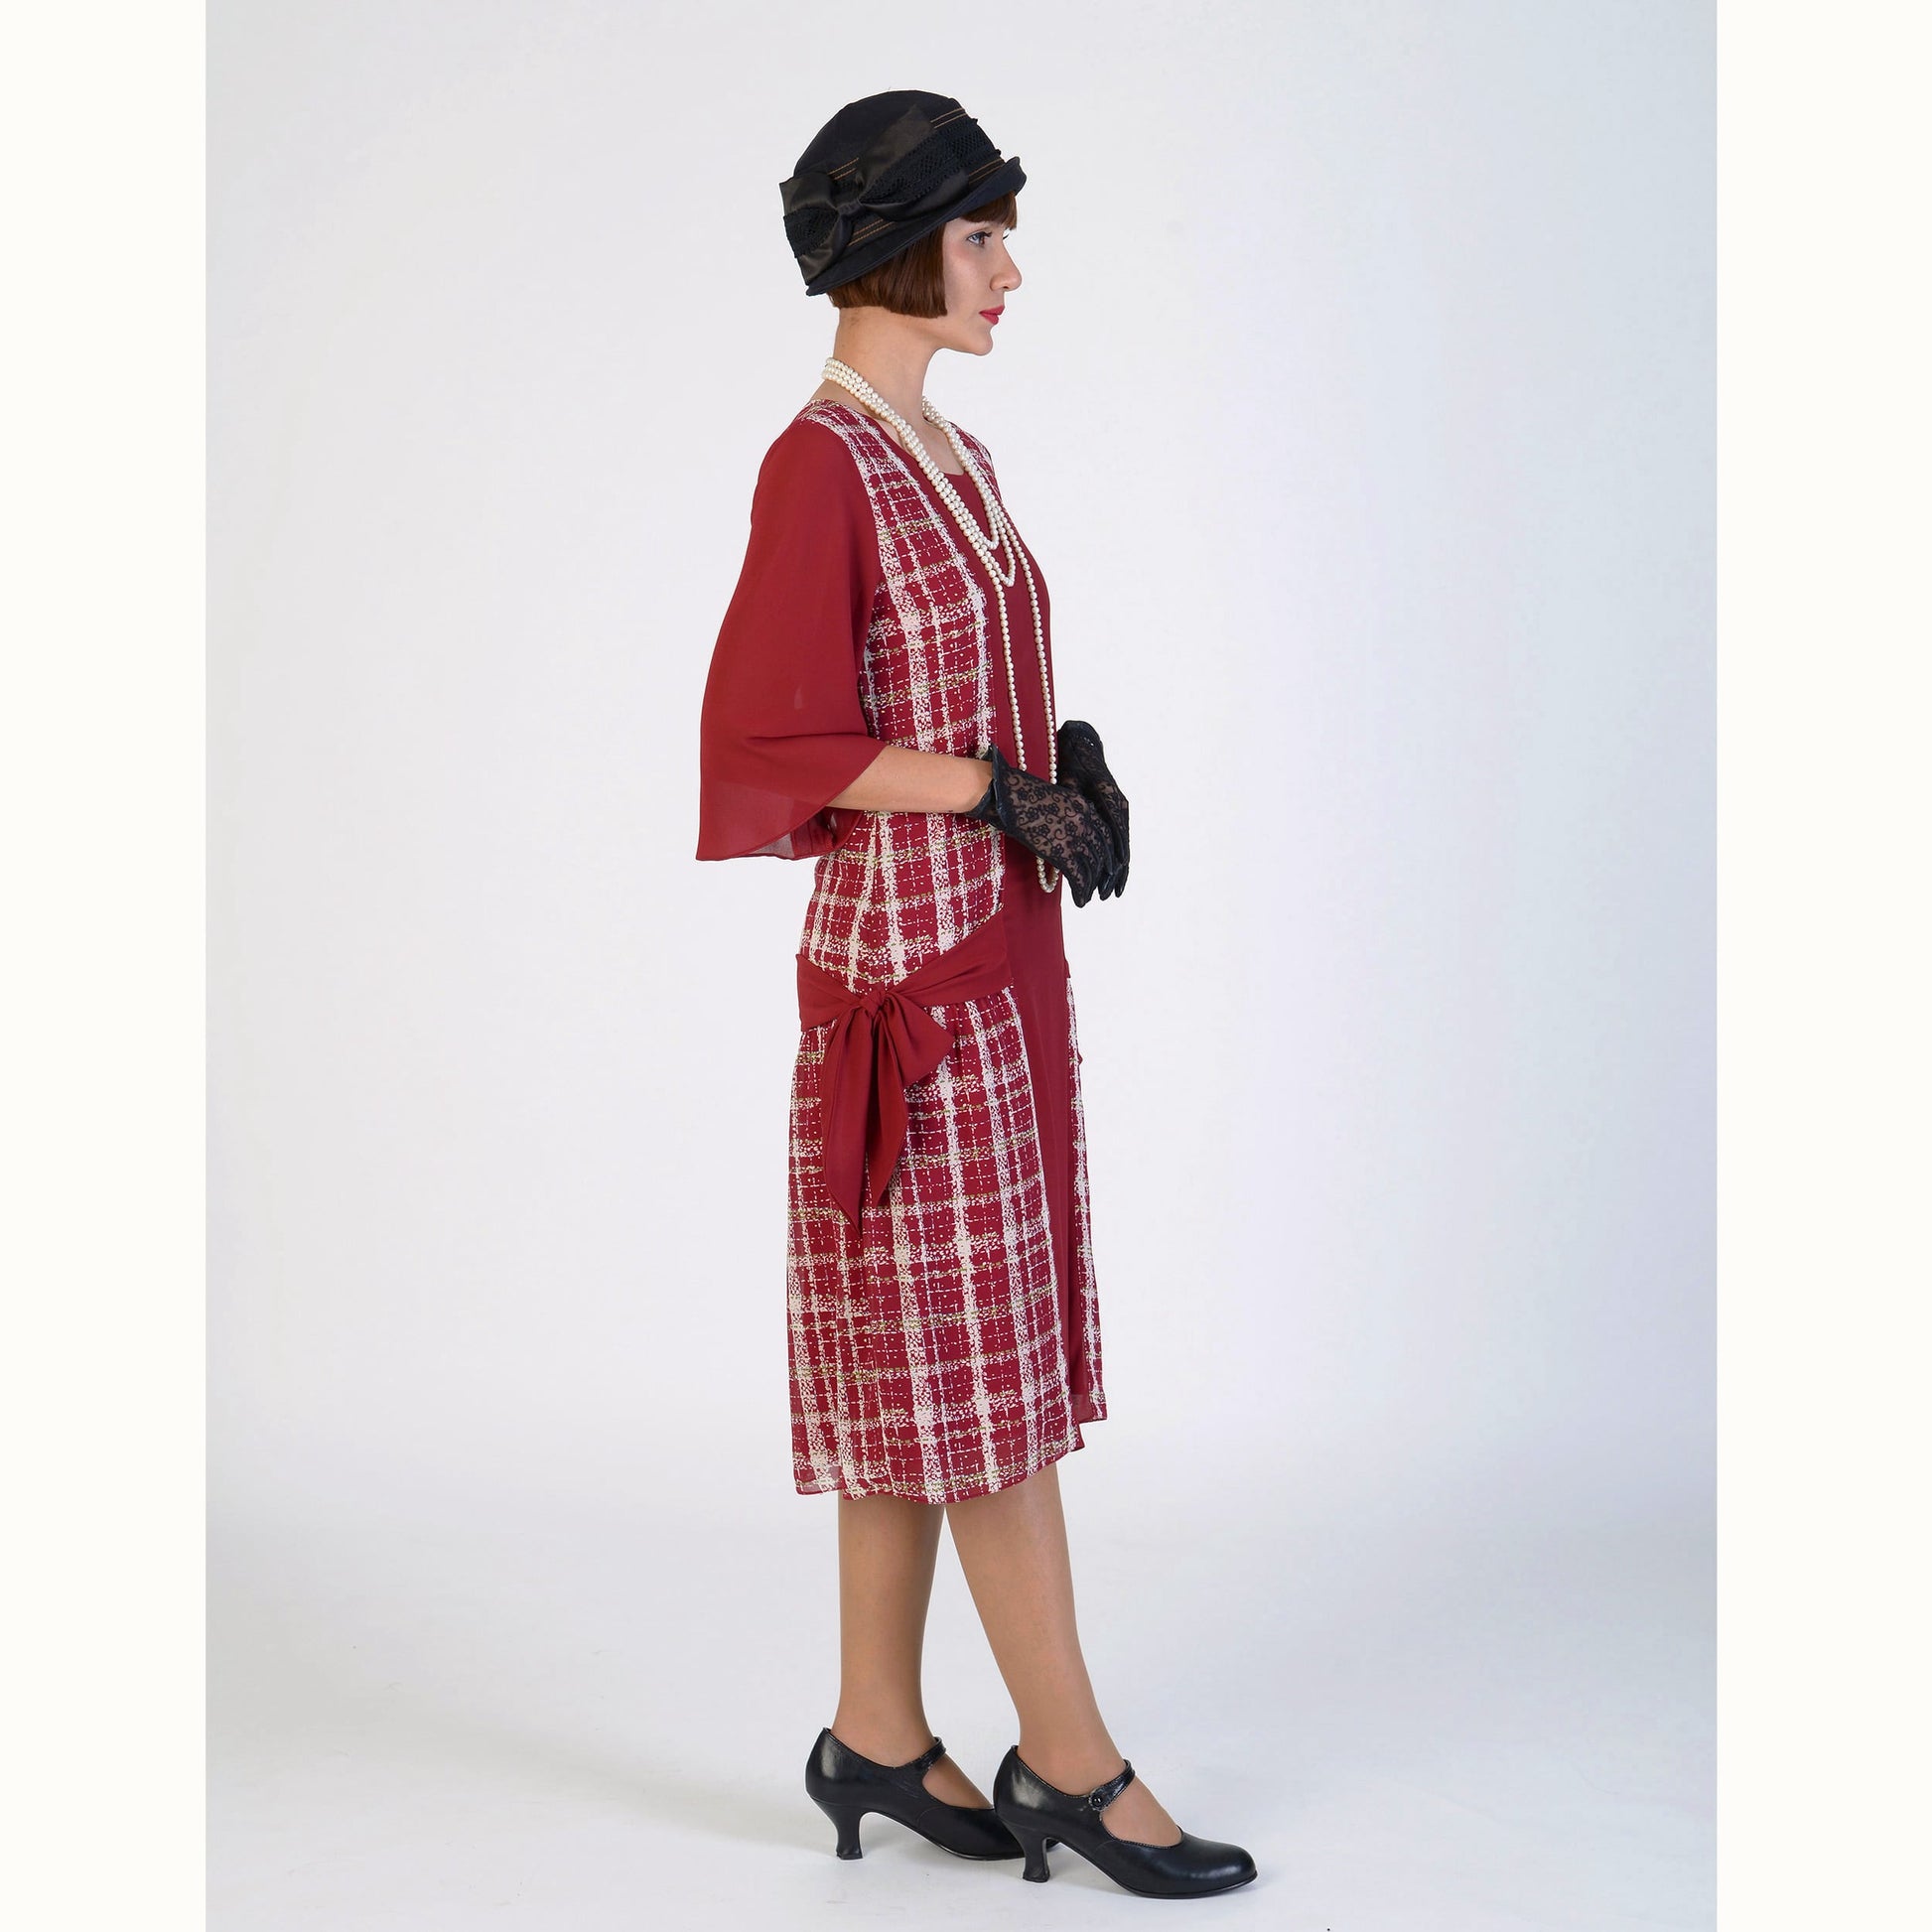 1920s reproduction dress, or Great Gatsby dress or flapper, made with a combination of plaid printed fabric in wine red and white and maroon red solid color. 